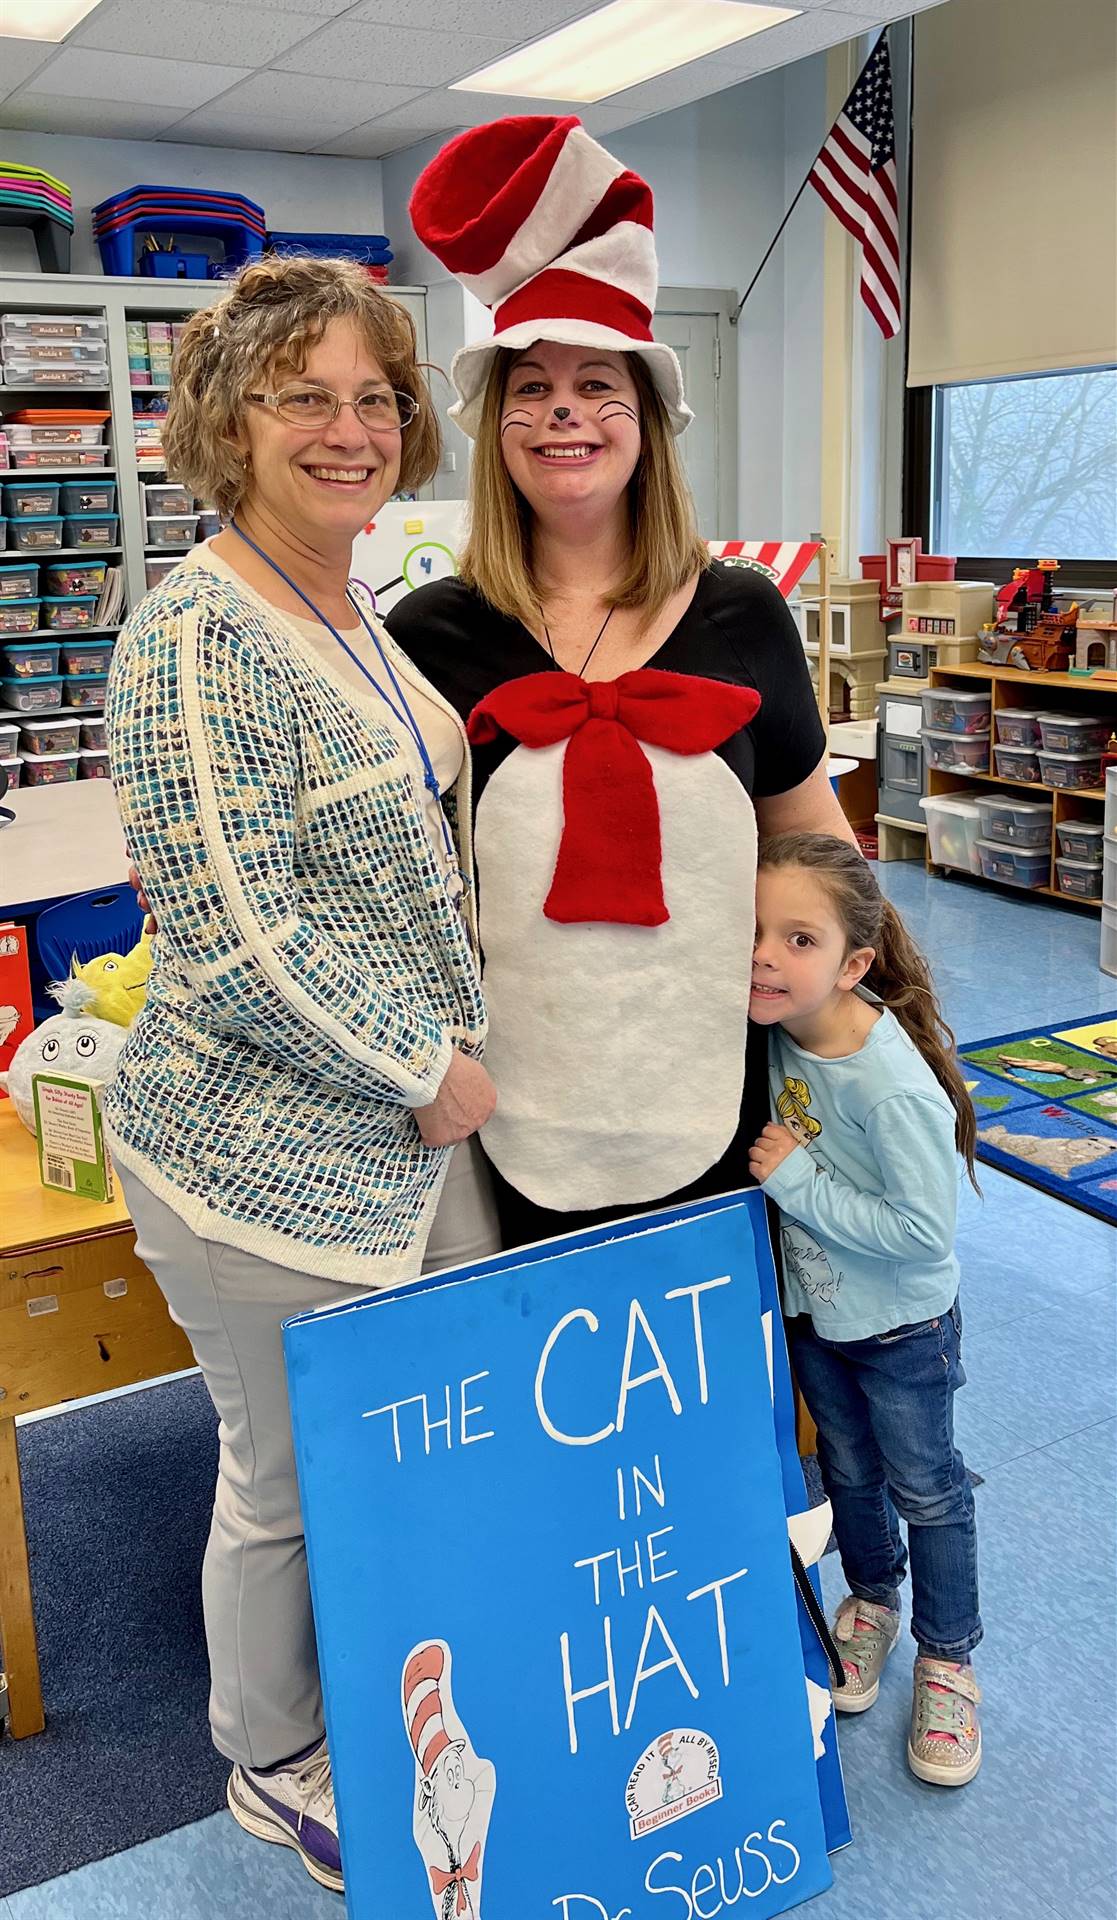 A staff member dressed in a cat in the hat character suit with another staff member and student.